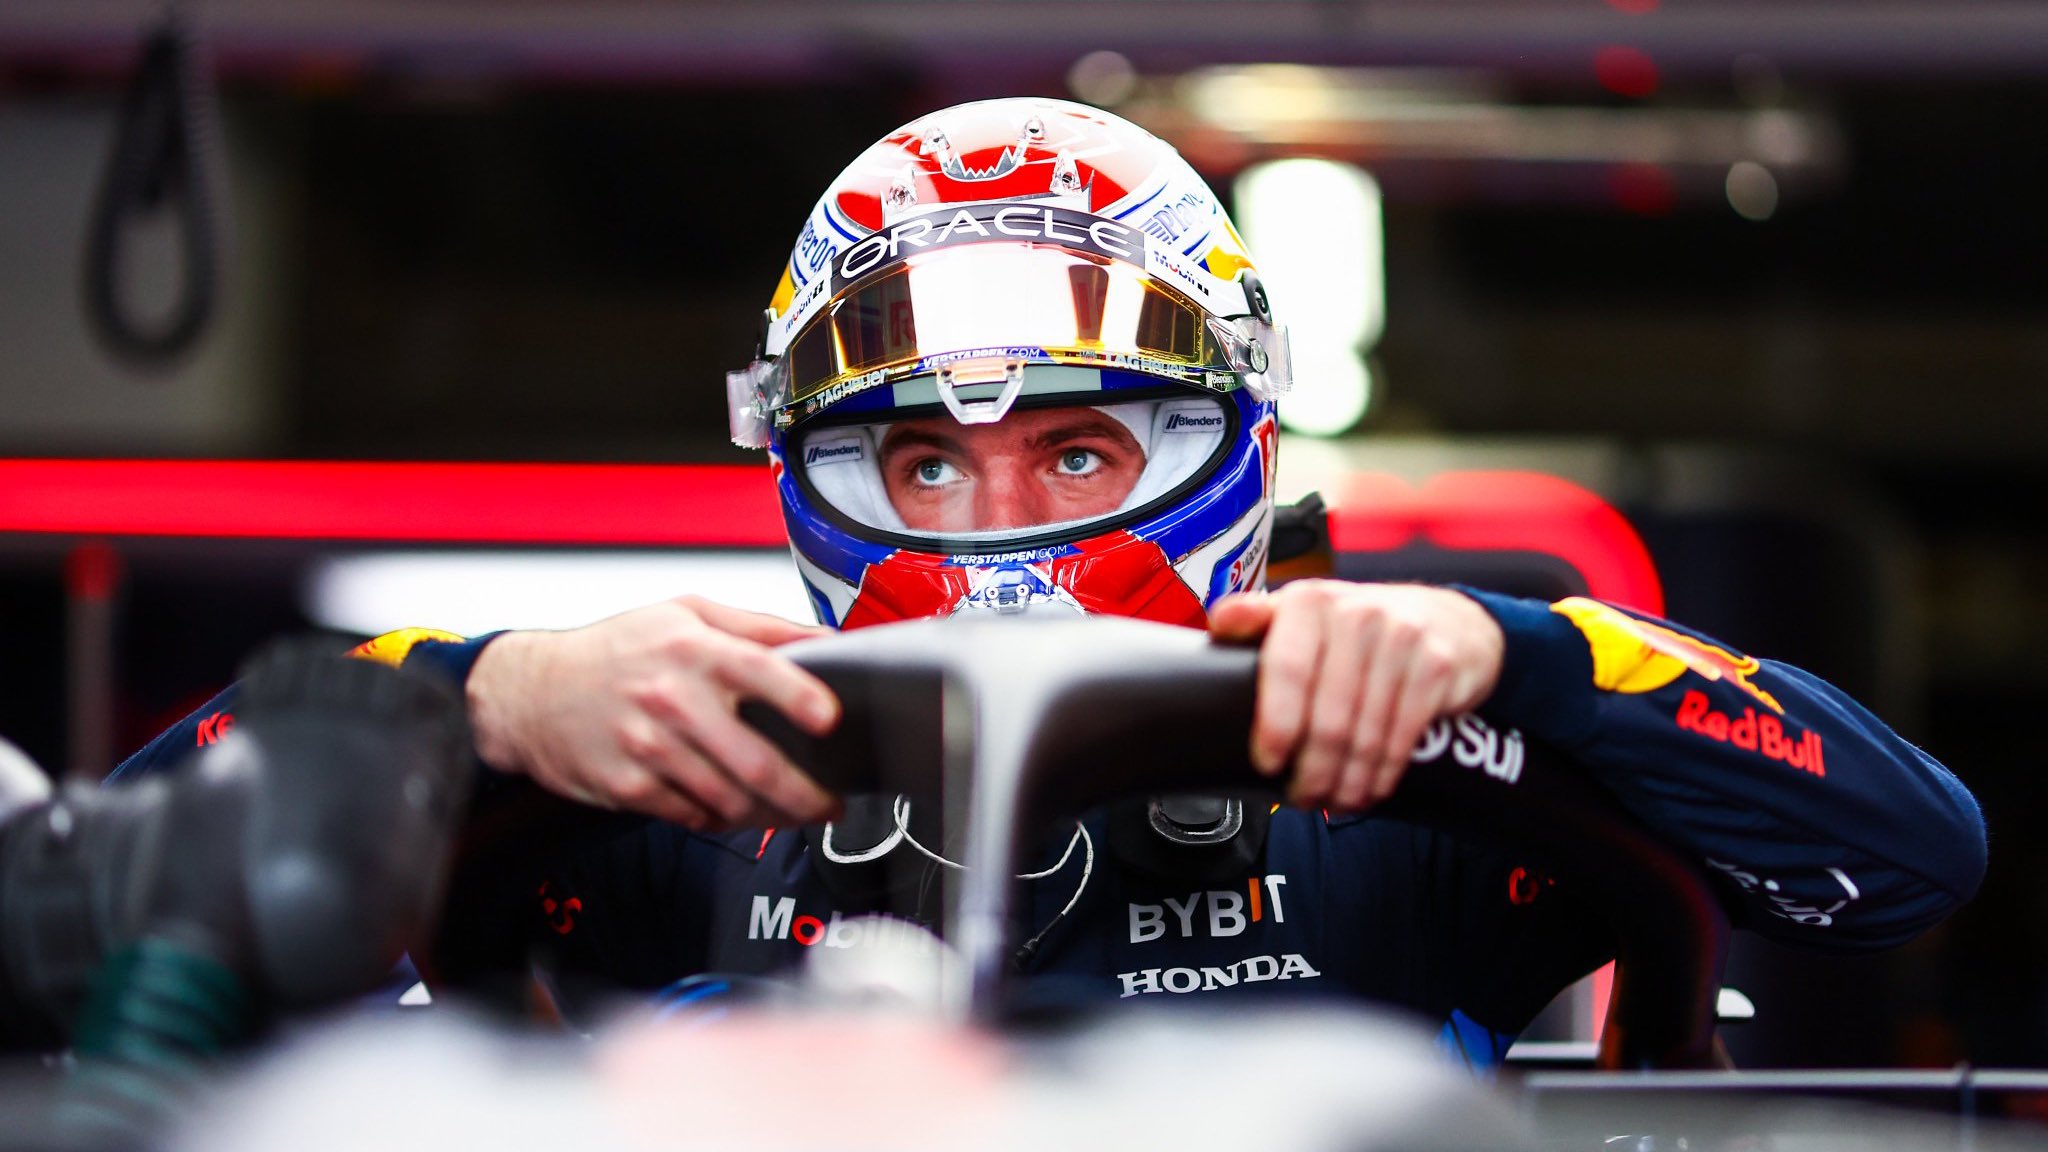 Max Verstappen edges out Perez for pole position by 0.066s at Suzuka, with Norris securing third place